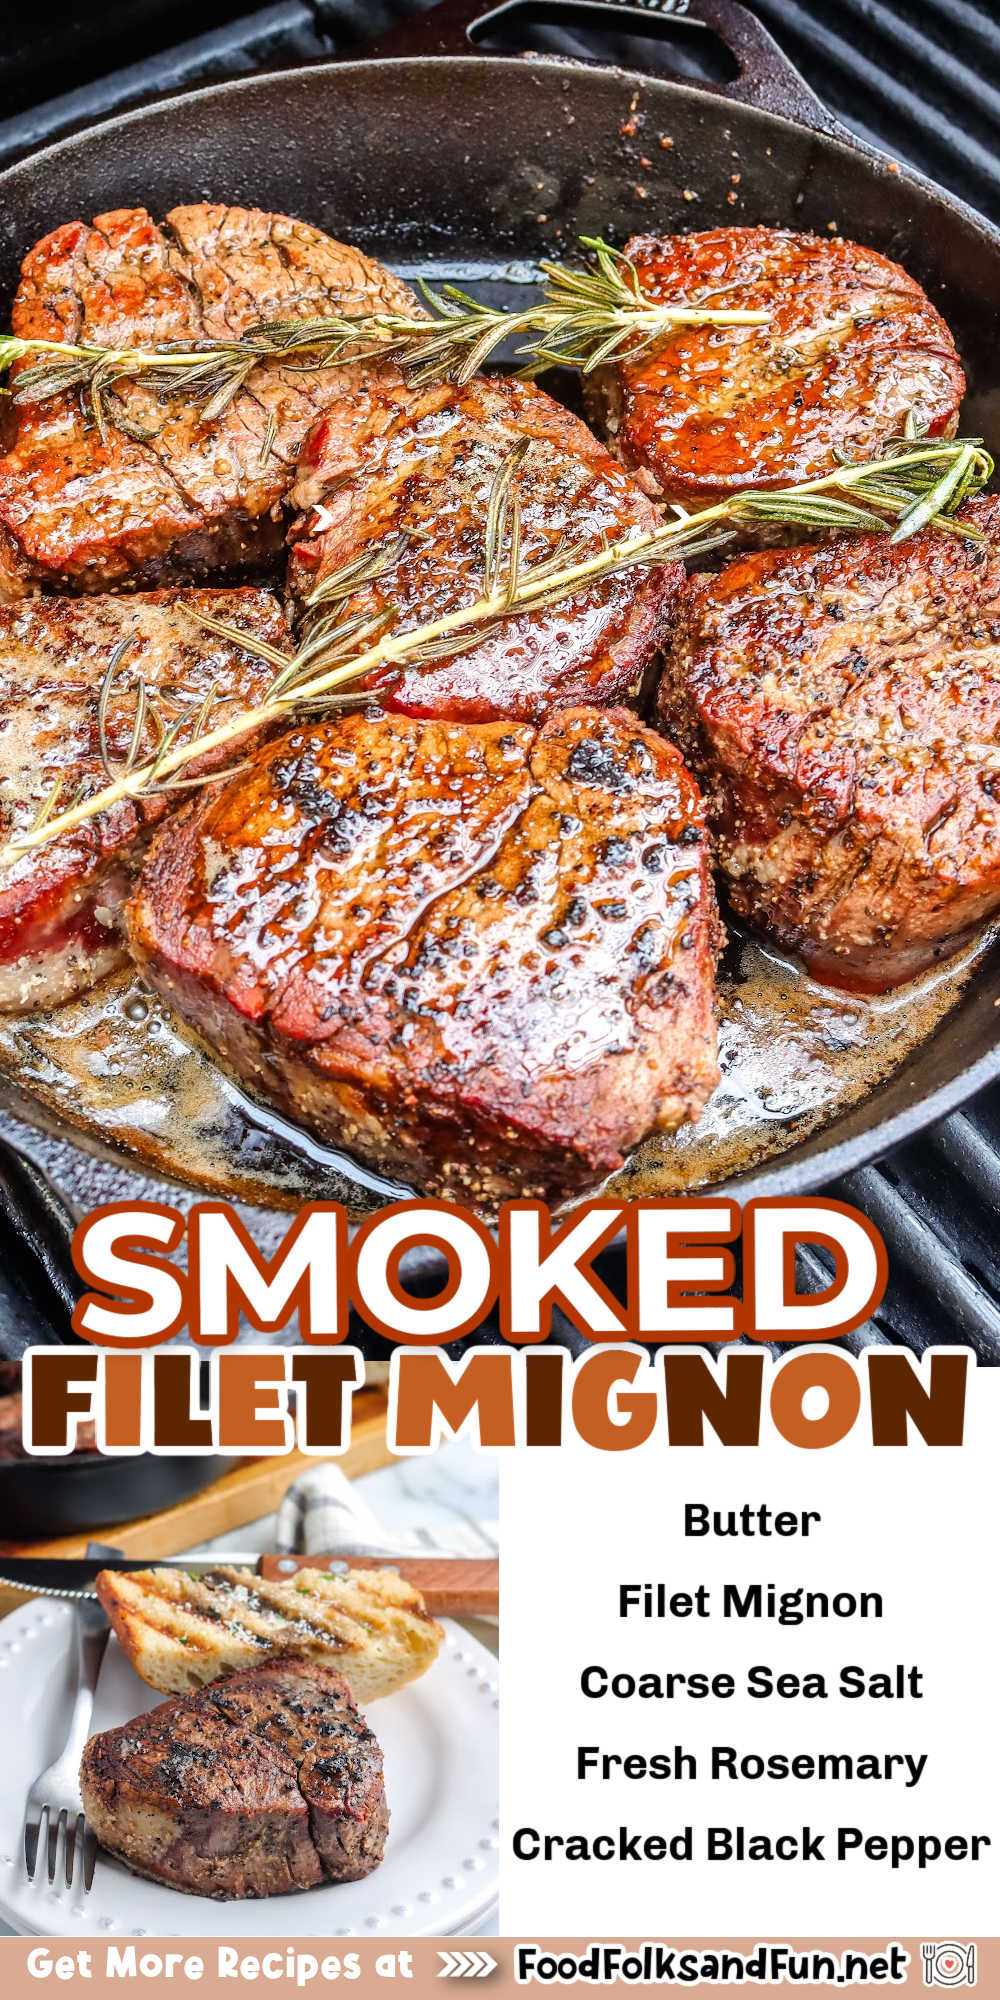 Smoke, sear, savor! This reverse sear method for Smoked Filet Mignon is a flavor masterpiece. Tender, juicy, and kissed with smoke - it's steak nirvana. via @foodfolksandfun